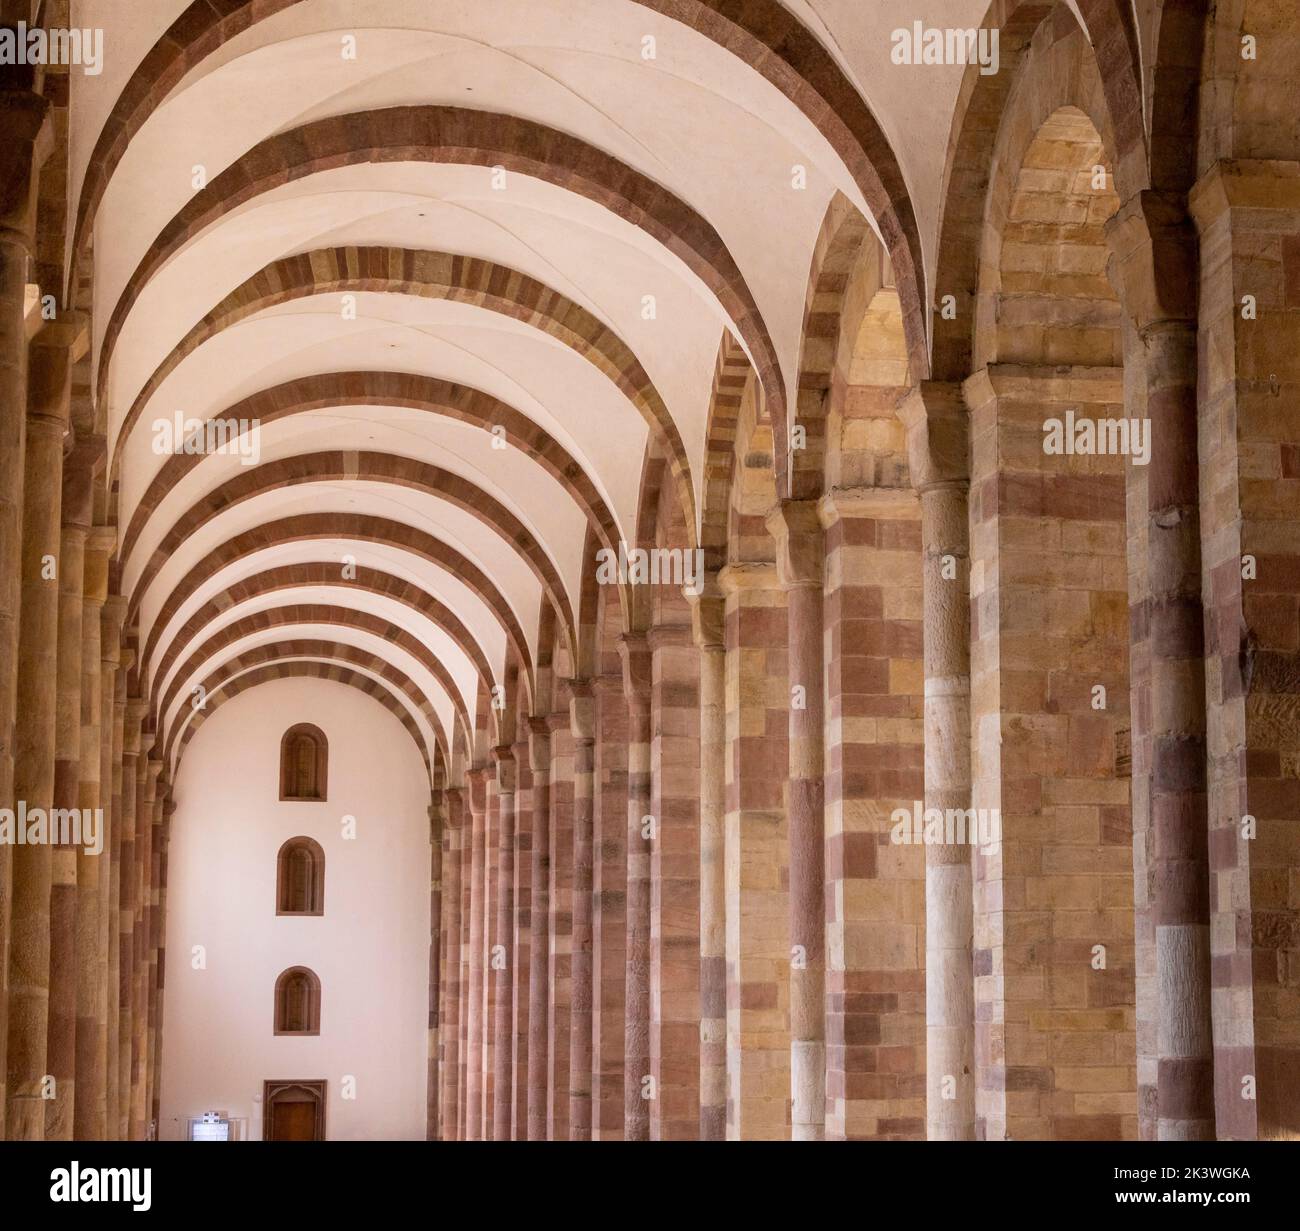 side aisle, Speyer Cathedral, Speyer, Germany Stock Photo